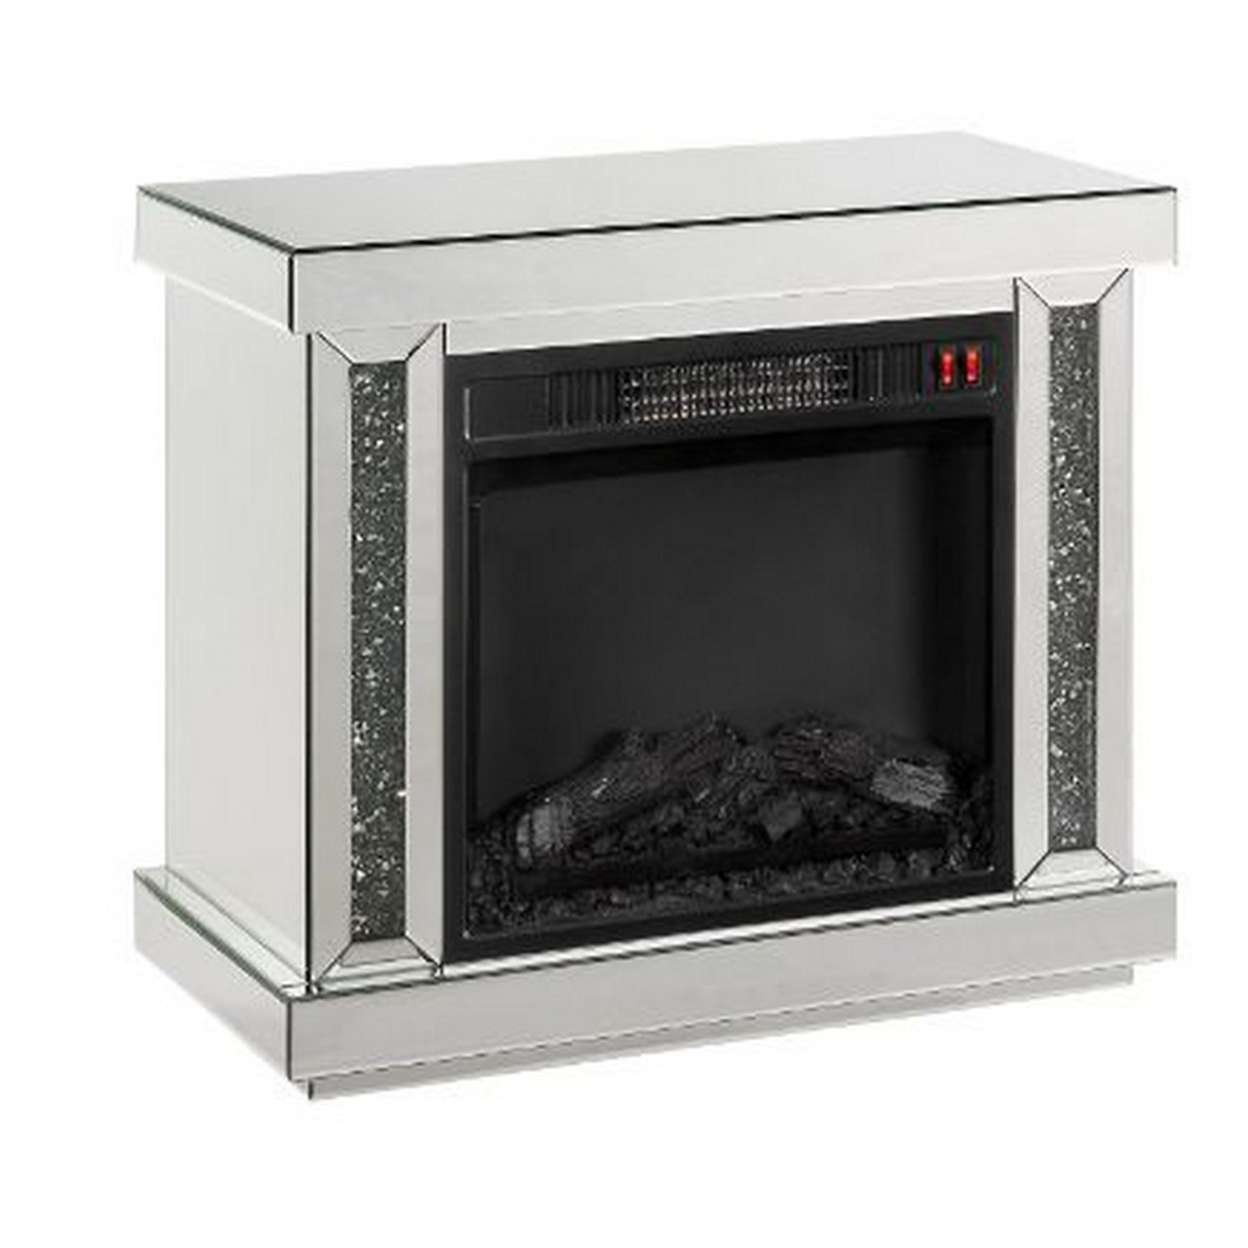 Su 28 Inch Electric Fireplace, Rectangular, Mirror Panel Framing And Faux Diamonds, Silver